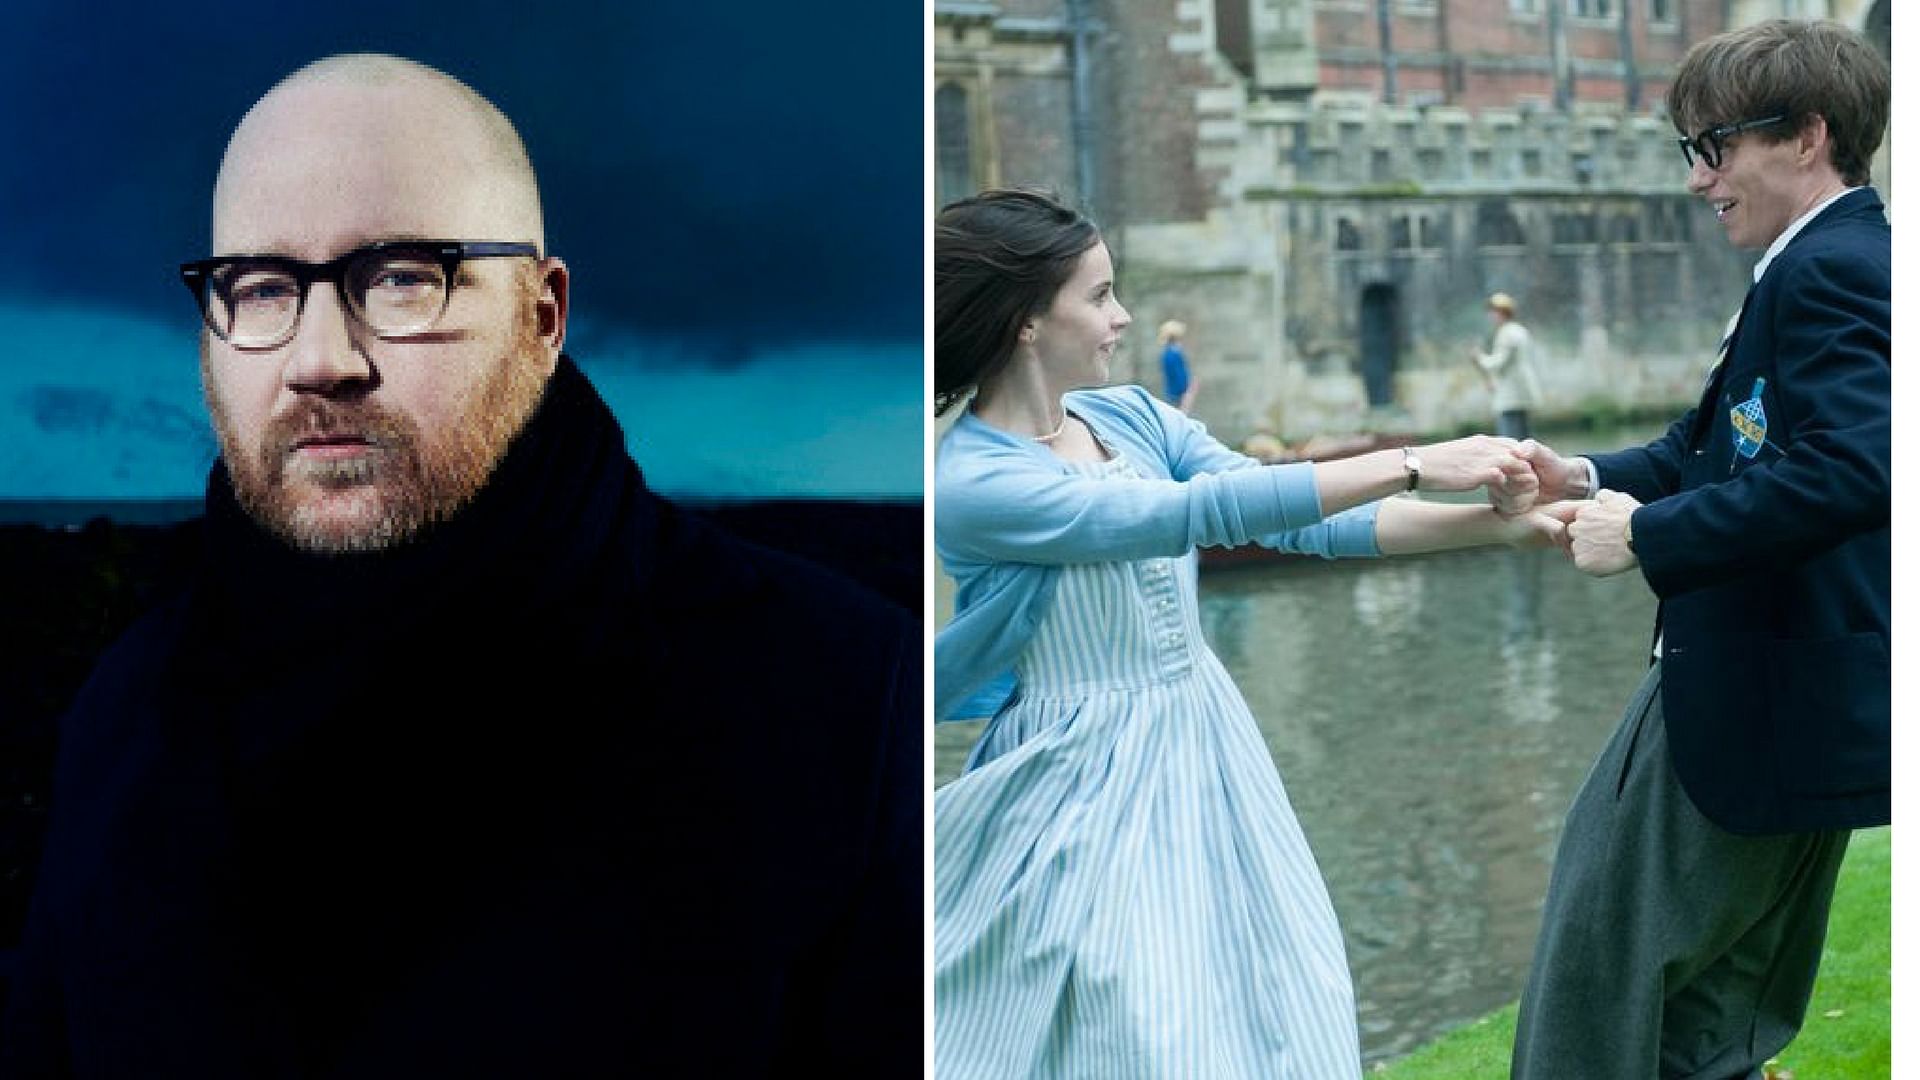 Oscar-nominated composer Jóhann Jóhannsson churned out music for <i>The Theory of Everything. (Photo Courtesy: Facebook/Altered by The Quint)</i>